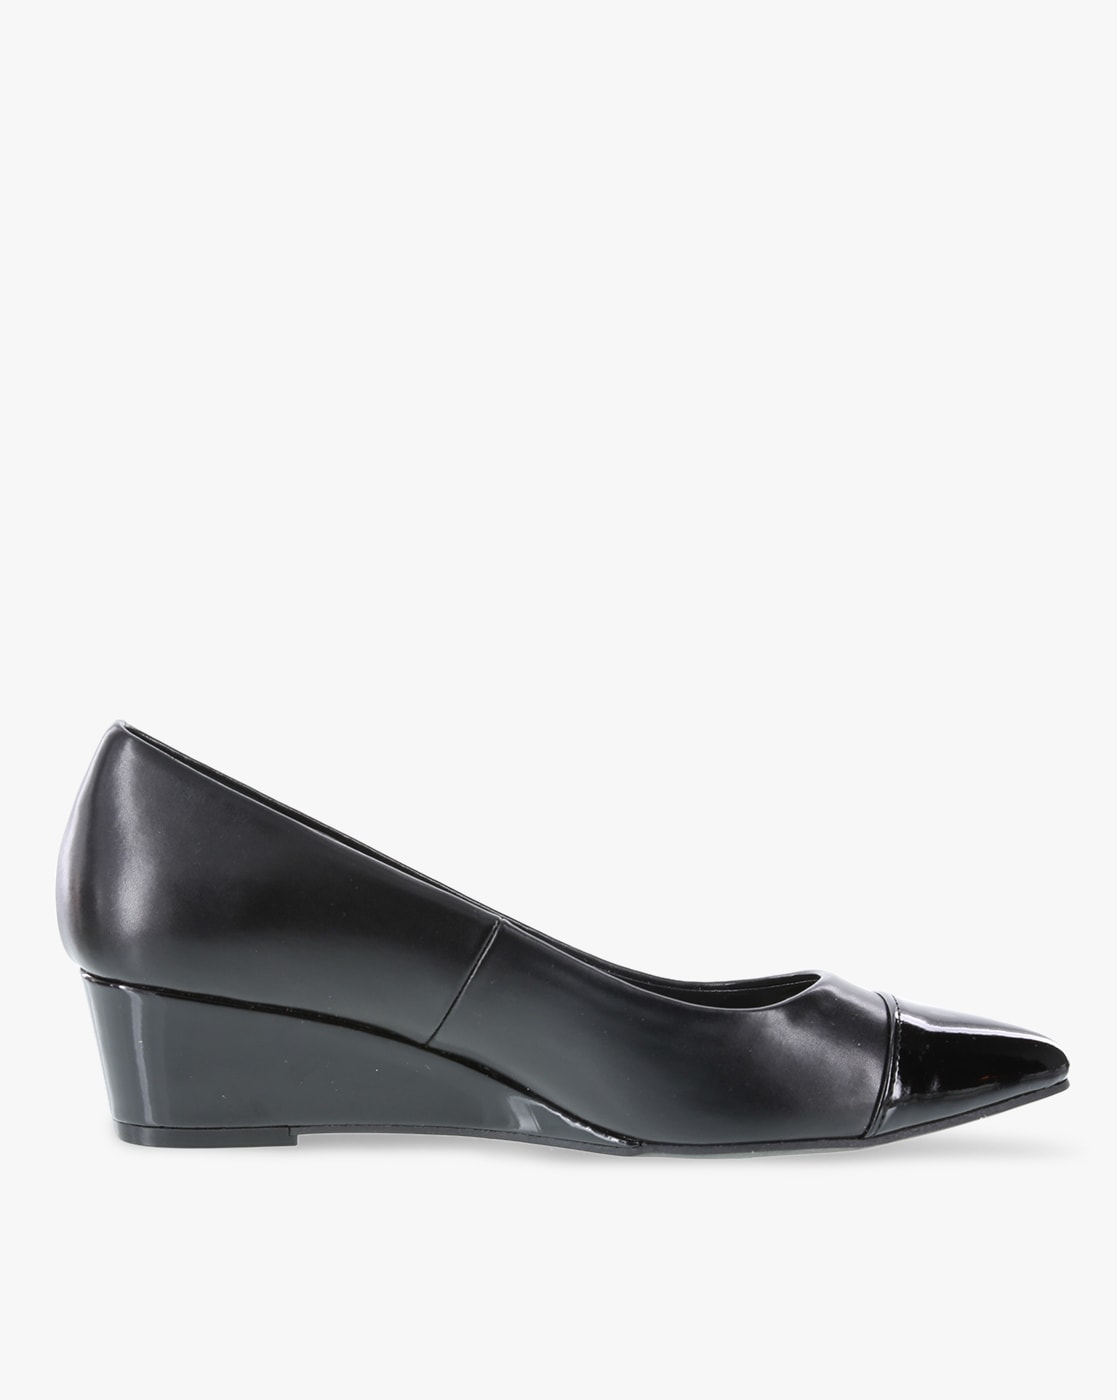 Buy Black Heeled Shoes for Women by DFX 